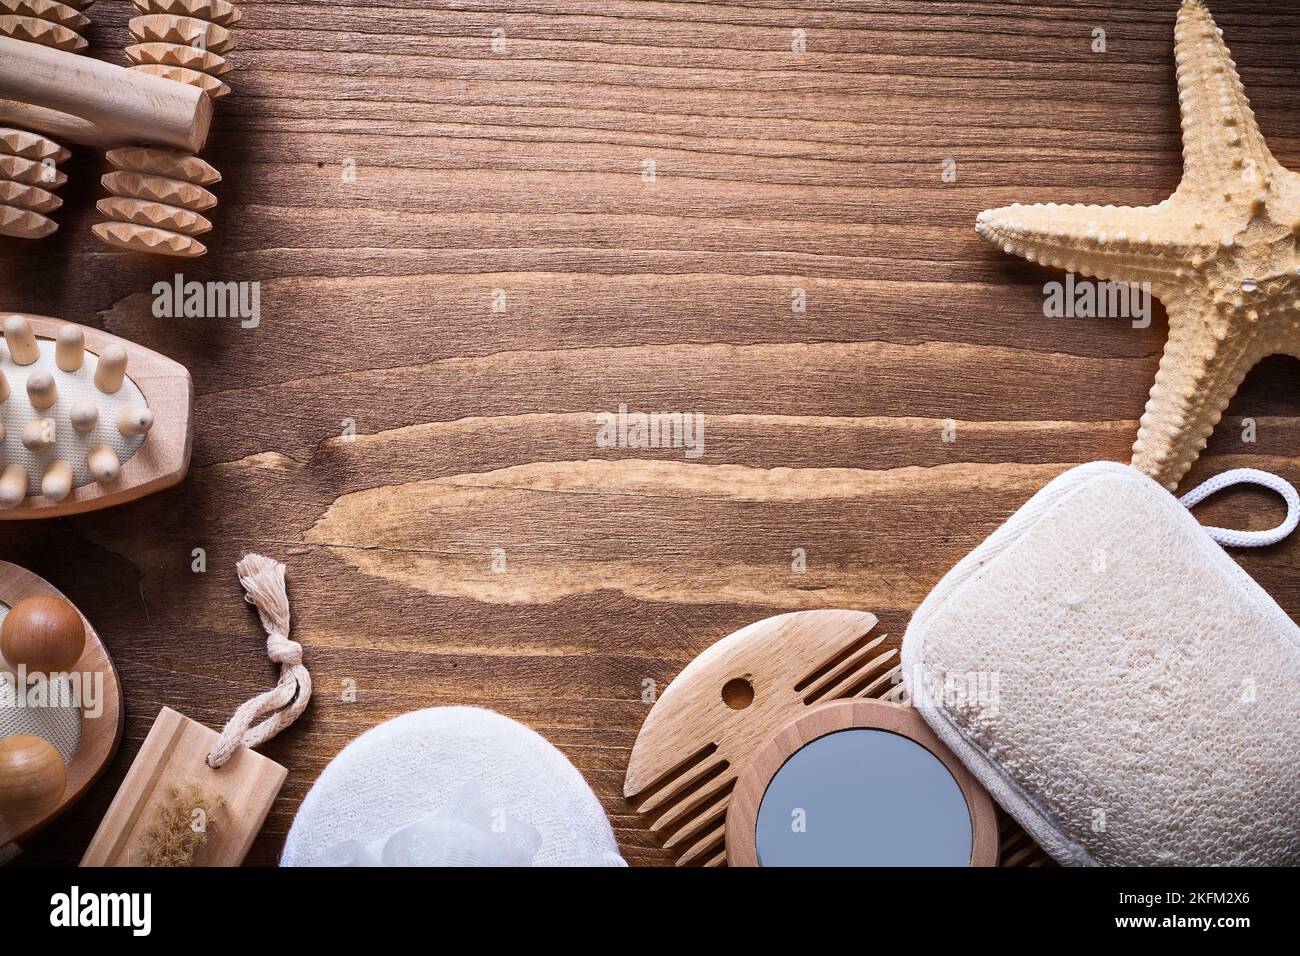 copyspace helthcare background sauna articles on vintage wooden board. Stock Photo